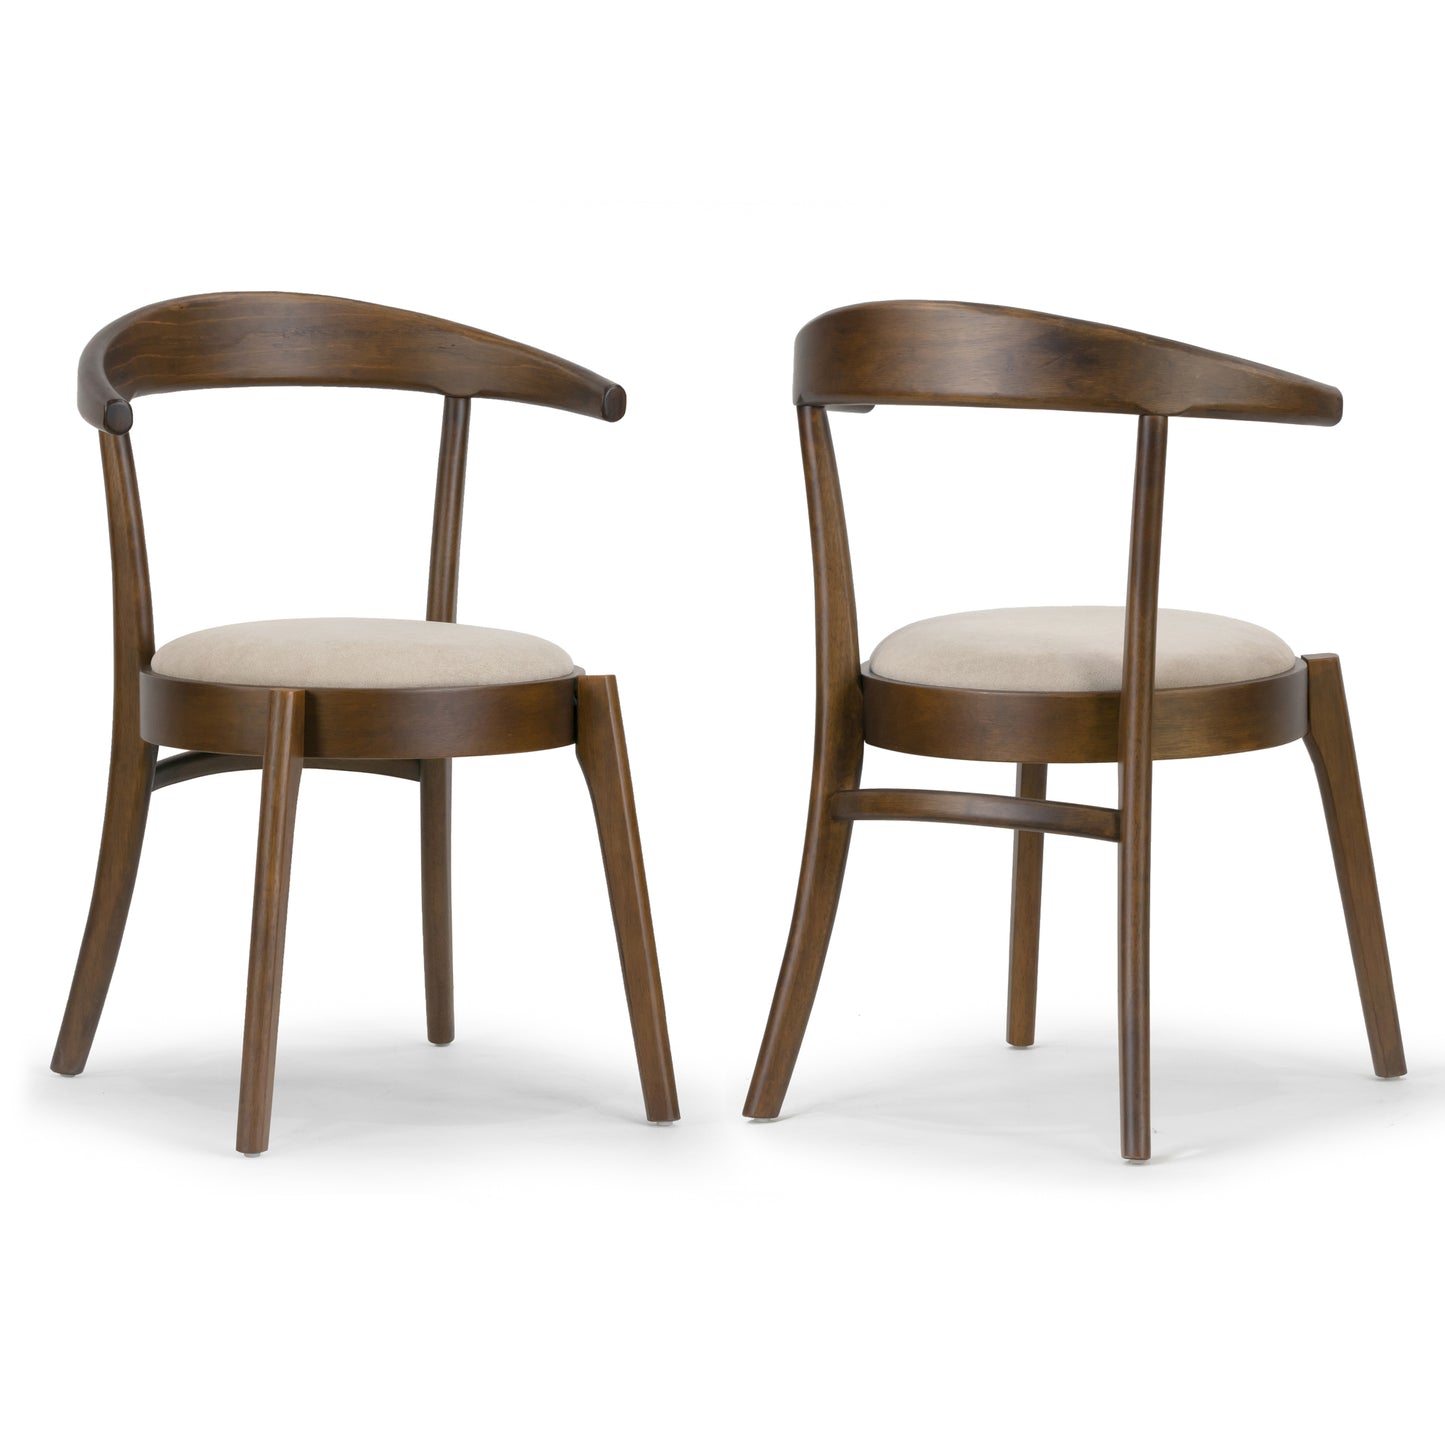 Set of 2 Audra Retro Modern Dark Brown Wood Round Chair with Curved Back